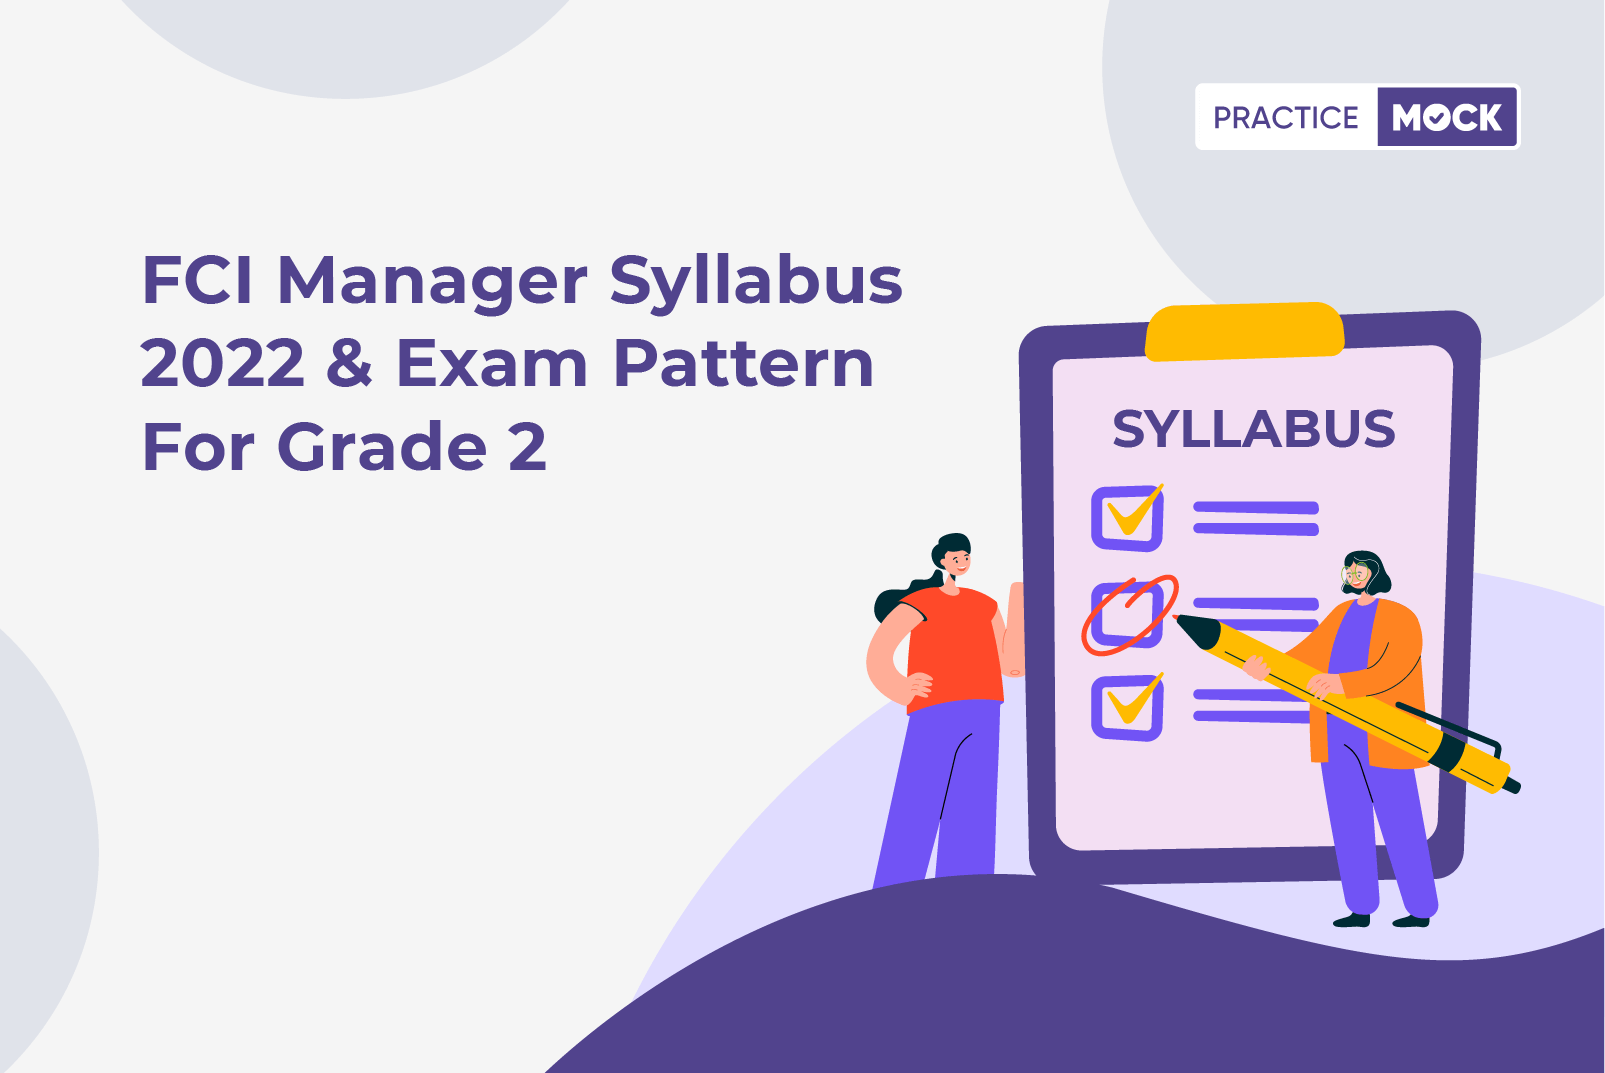 FCI Manager Syllabus 2022 and Exam Pattern for Grade 2